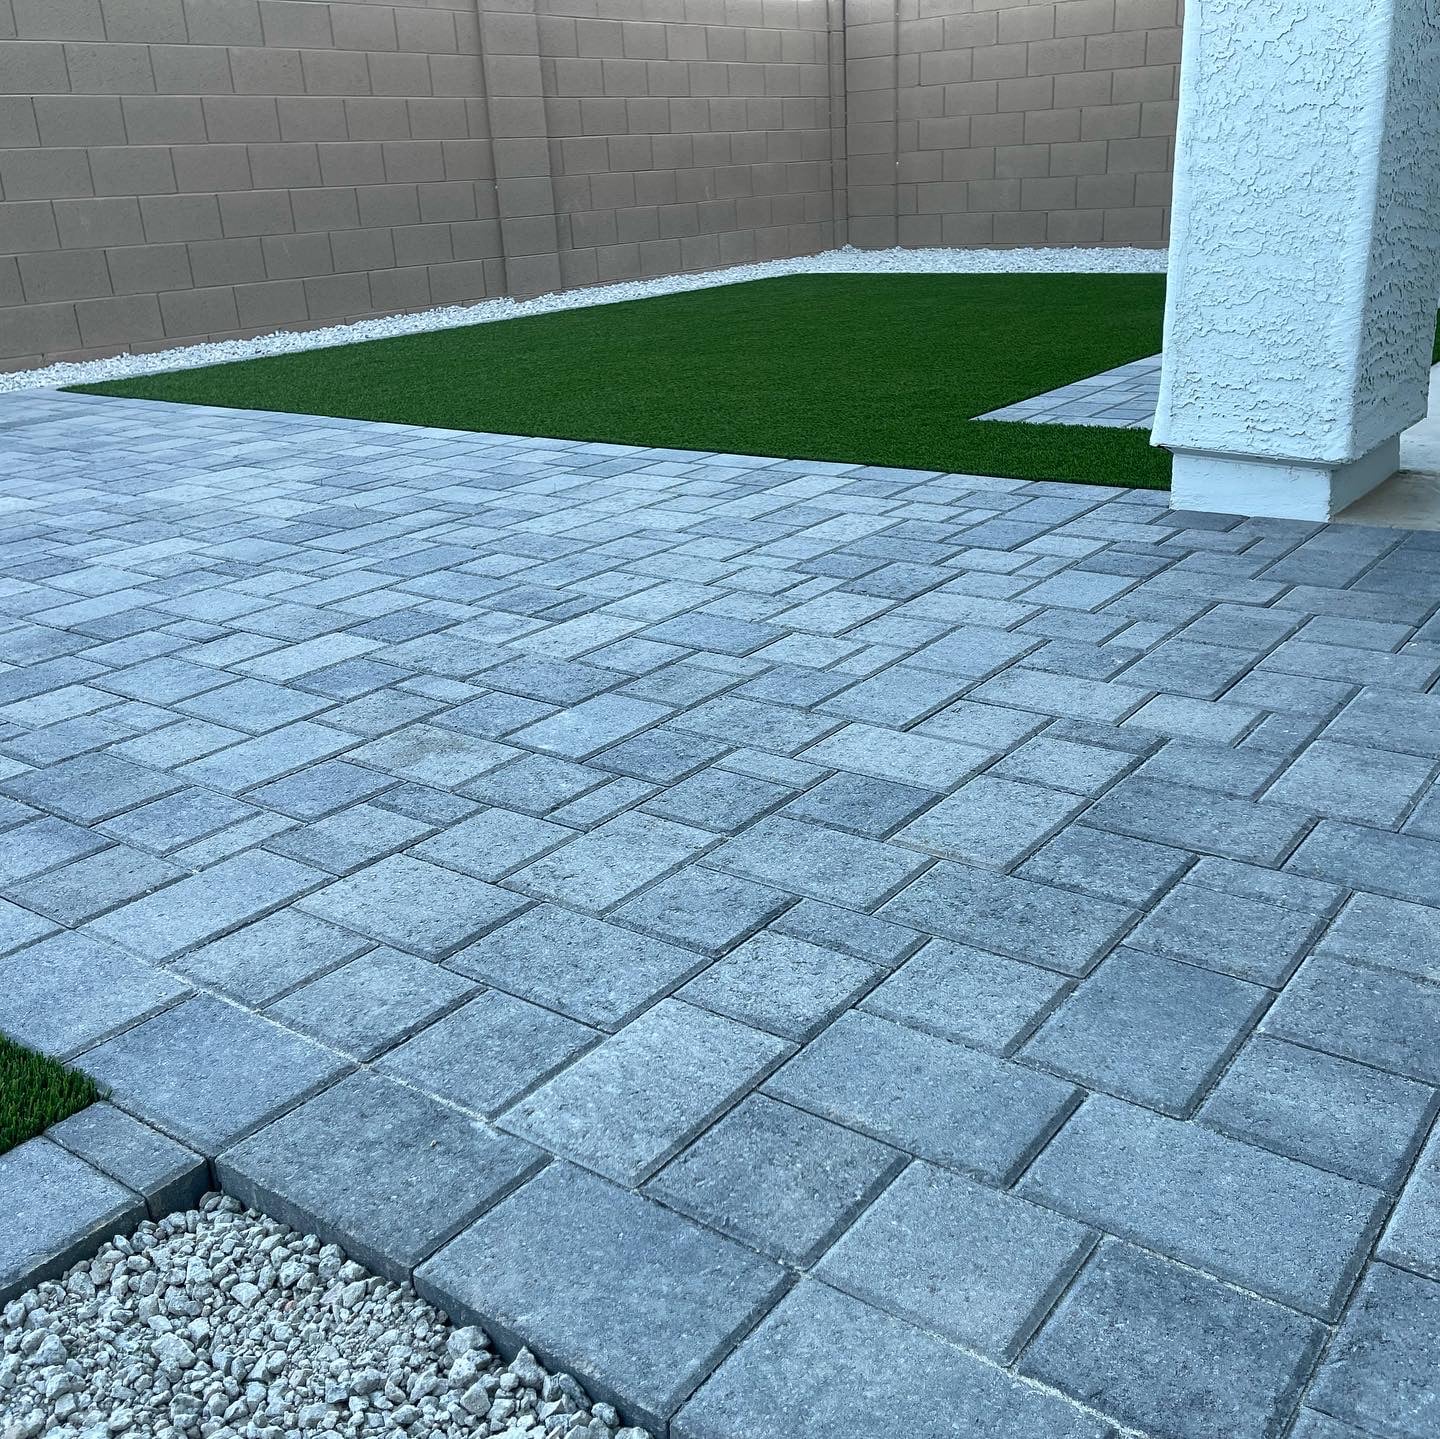 Pavers leading to patch of artificial turf